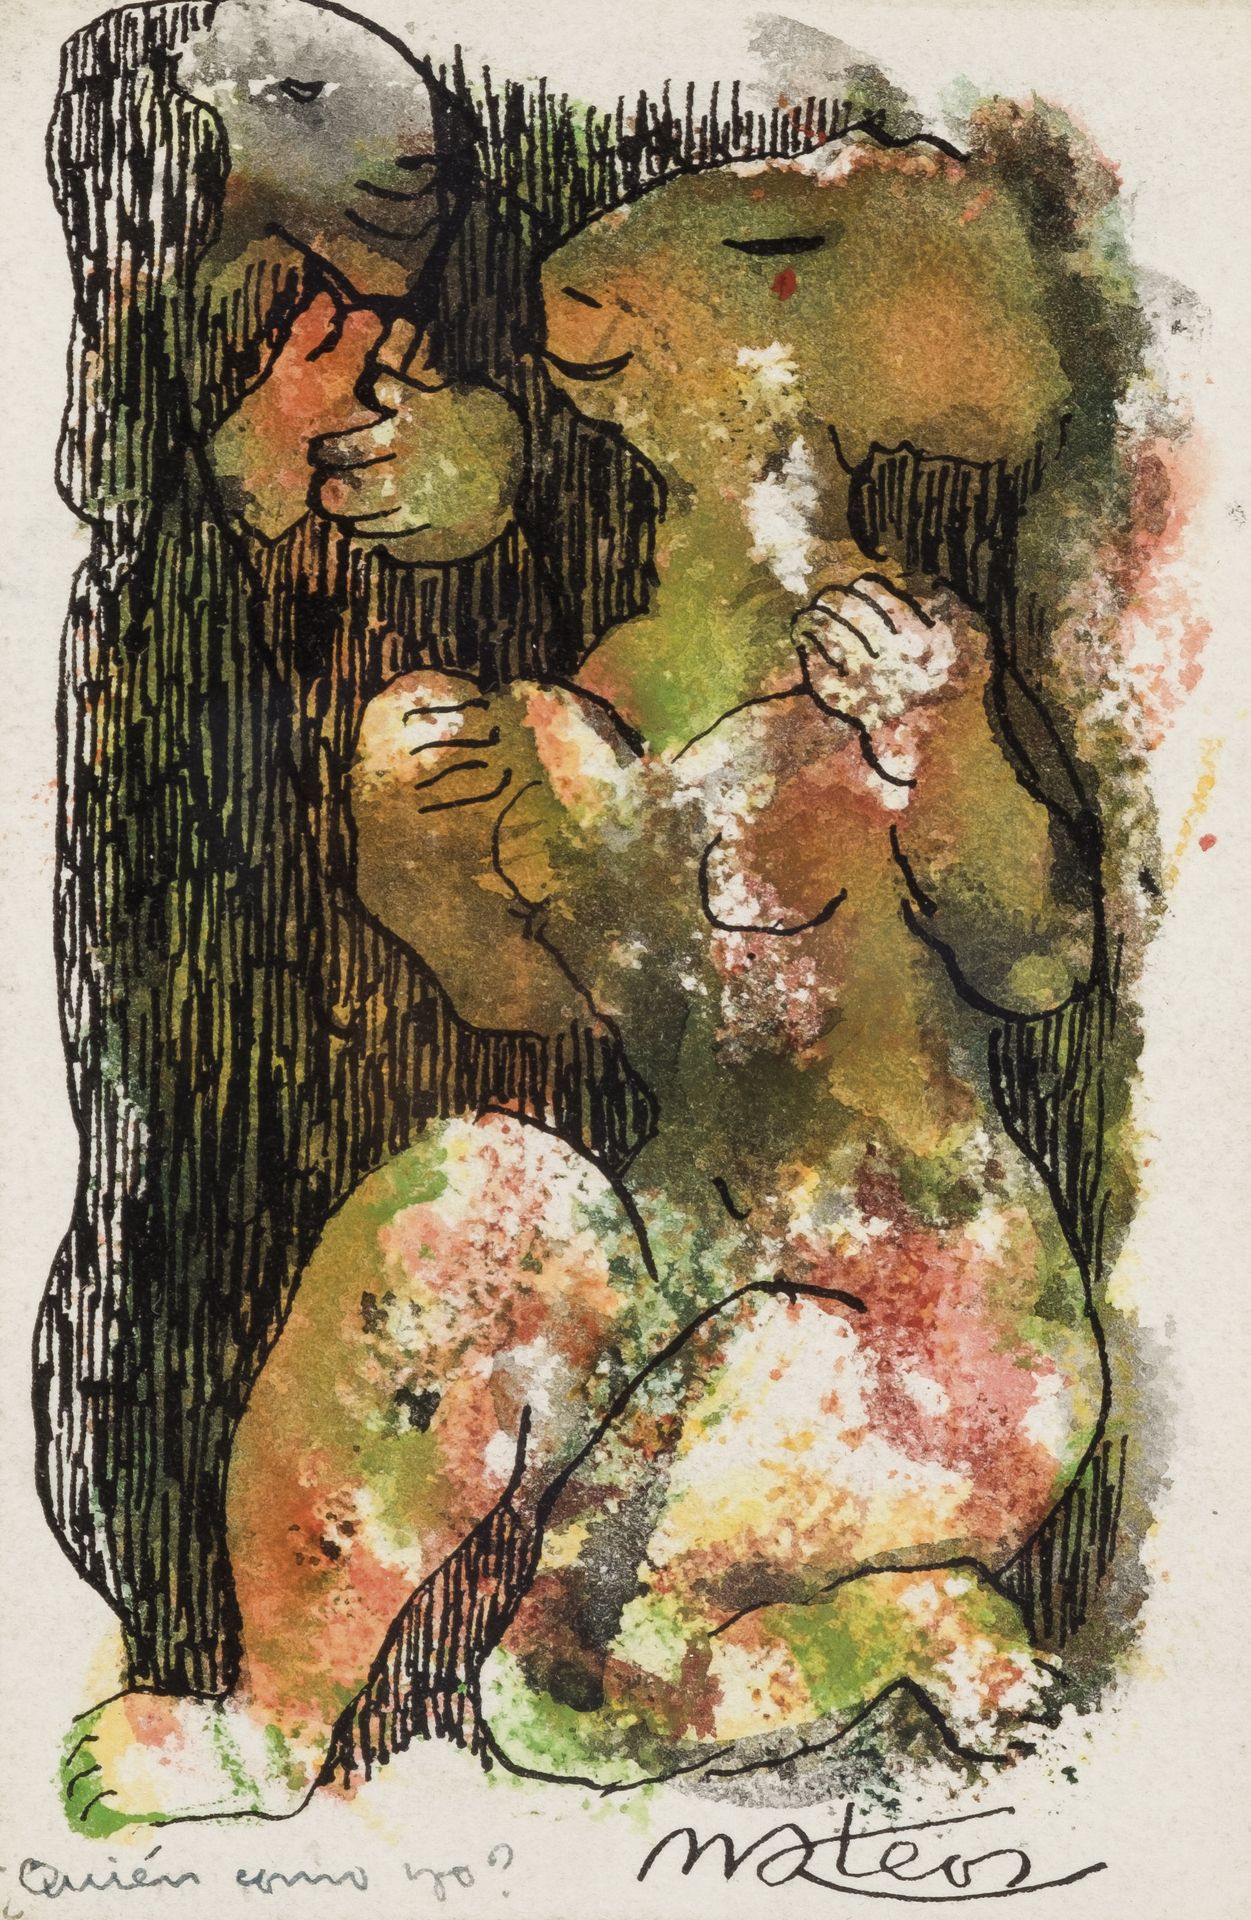 MATEOS, FRANCISCO (1897 - 1976) Ink and watercolor on paper. Signed in the lower&hellip;